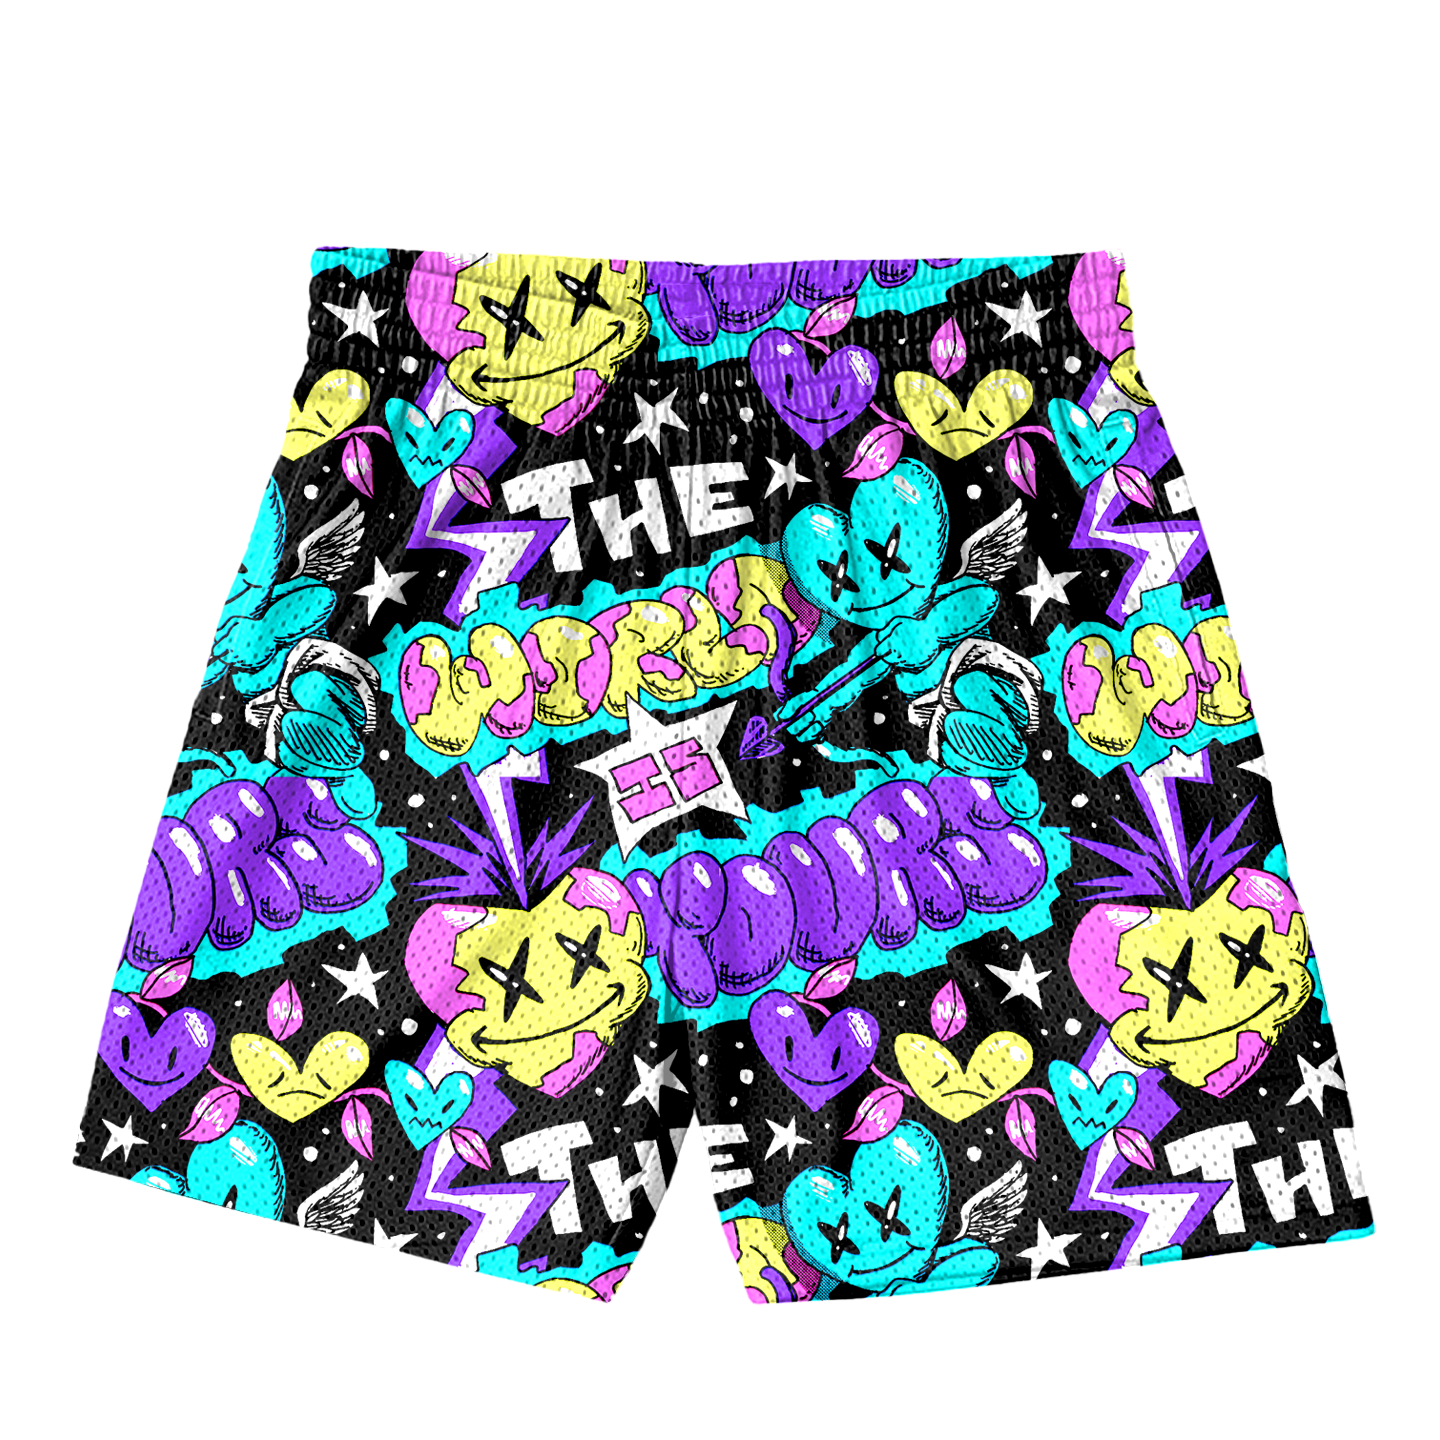 The world is yours Mesh shorts (Disco) - Royal Surge